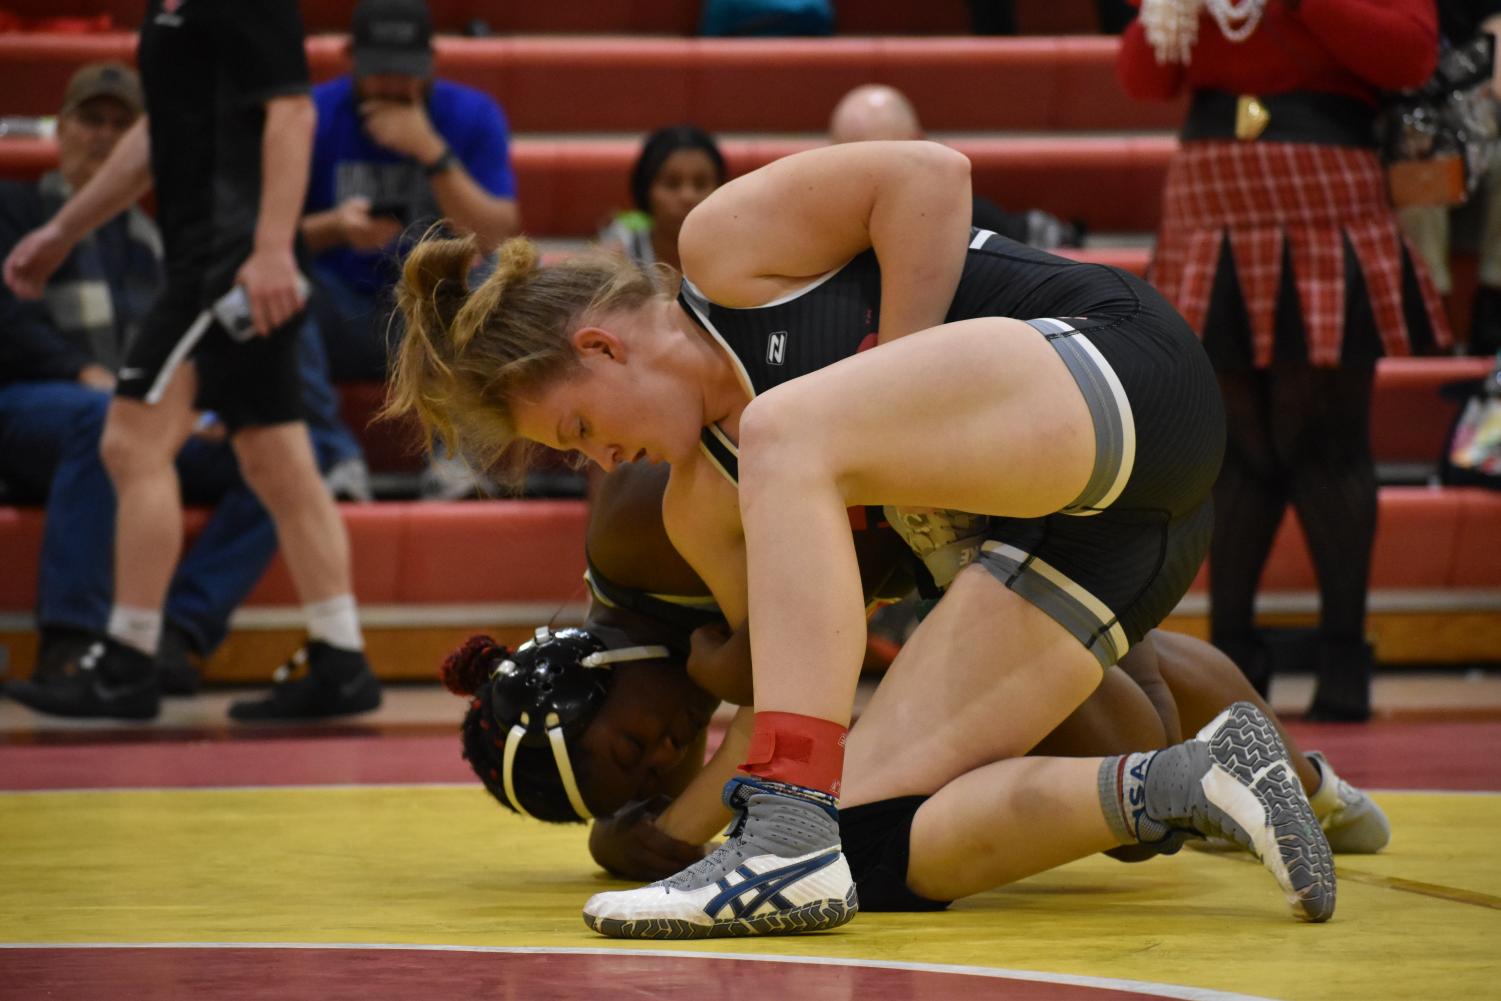 Jenna Joseph placed 4th at the National Collegiate Women’s Wrestling Tournament Region IV Championship, qualifying for the national tournament in her and the teams first season.